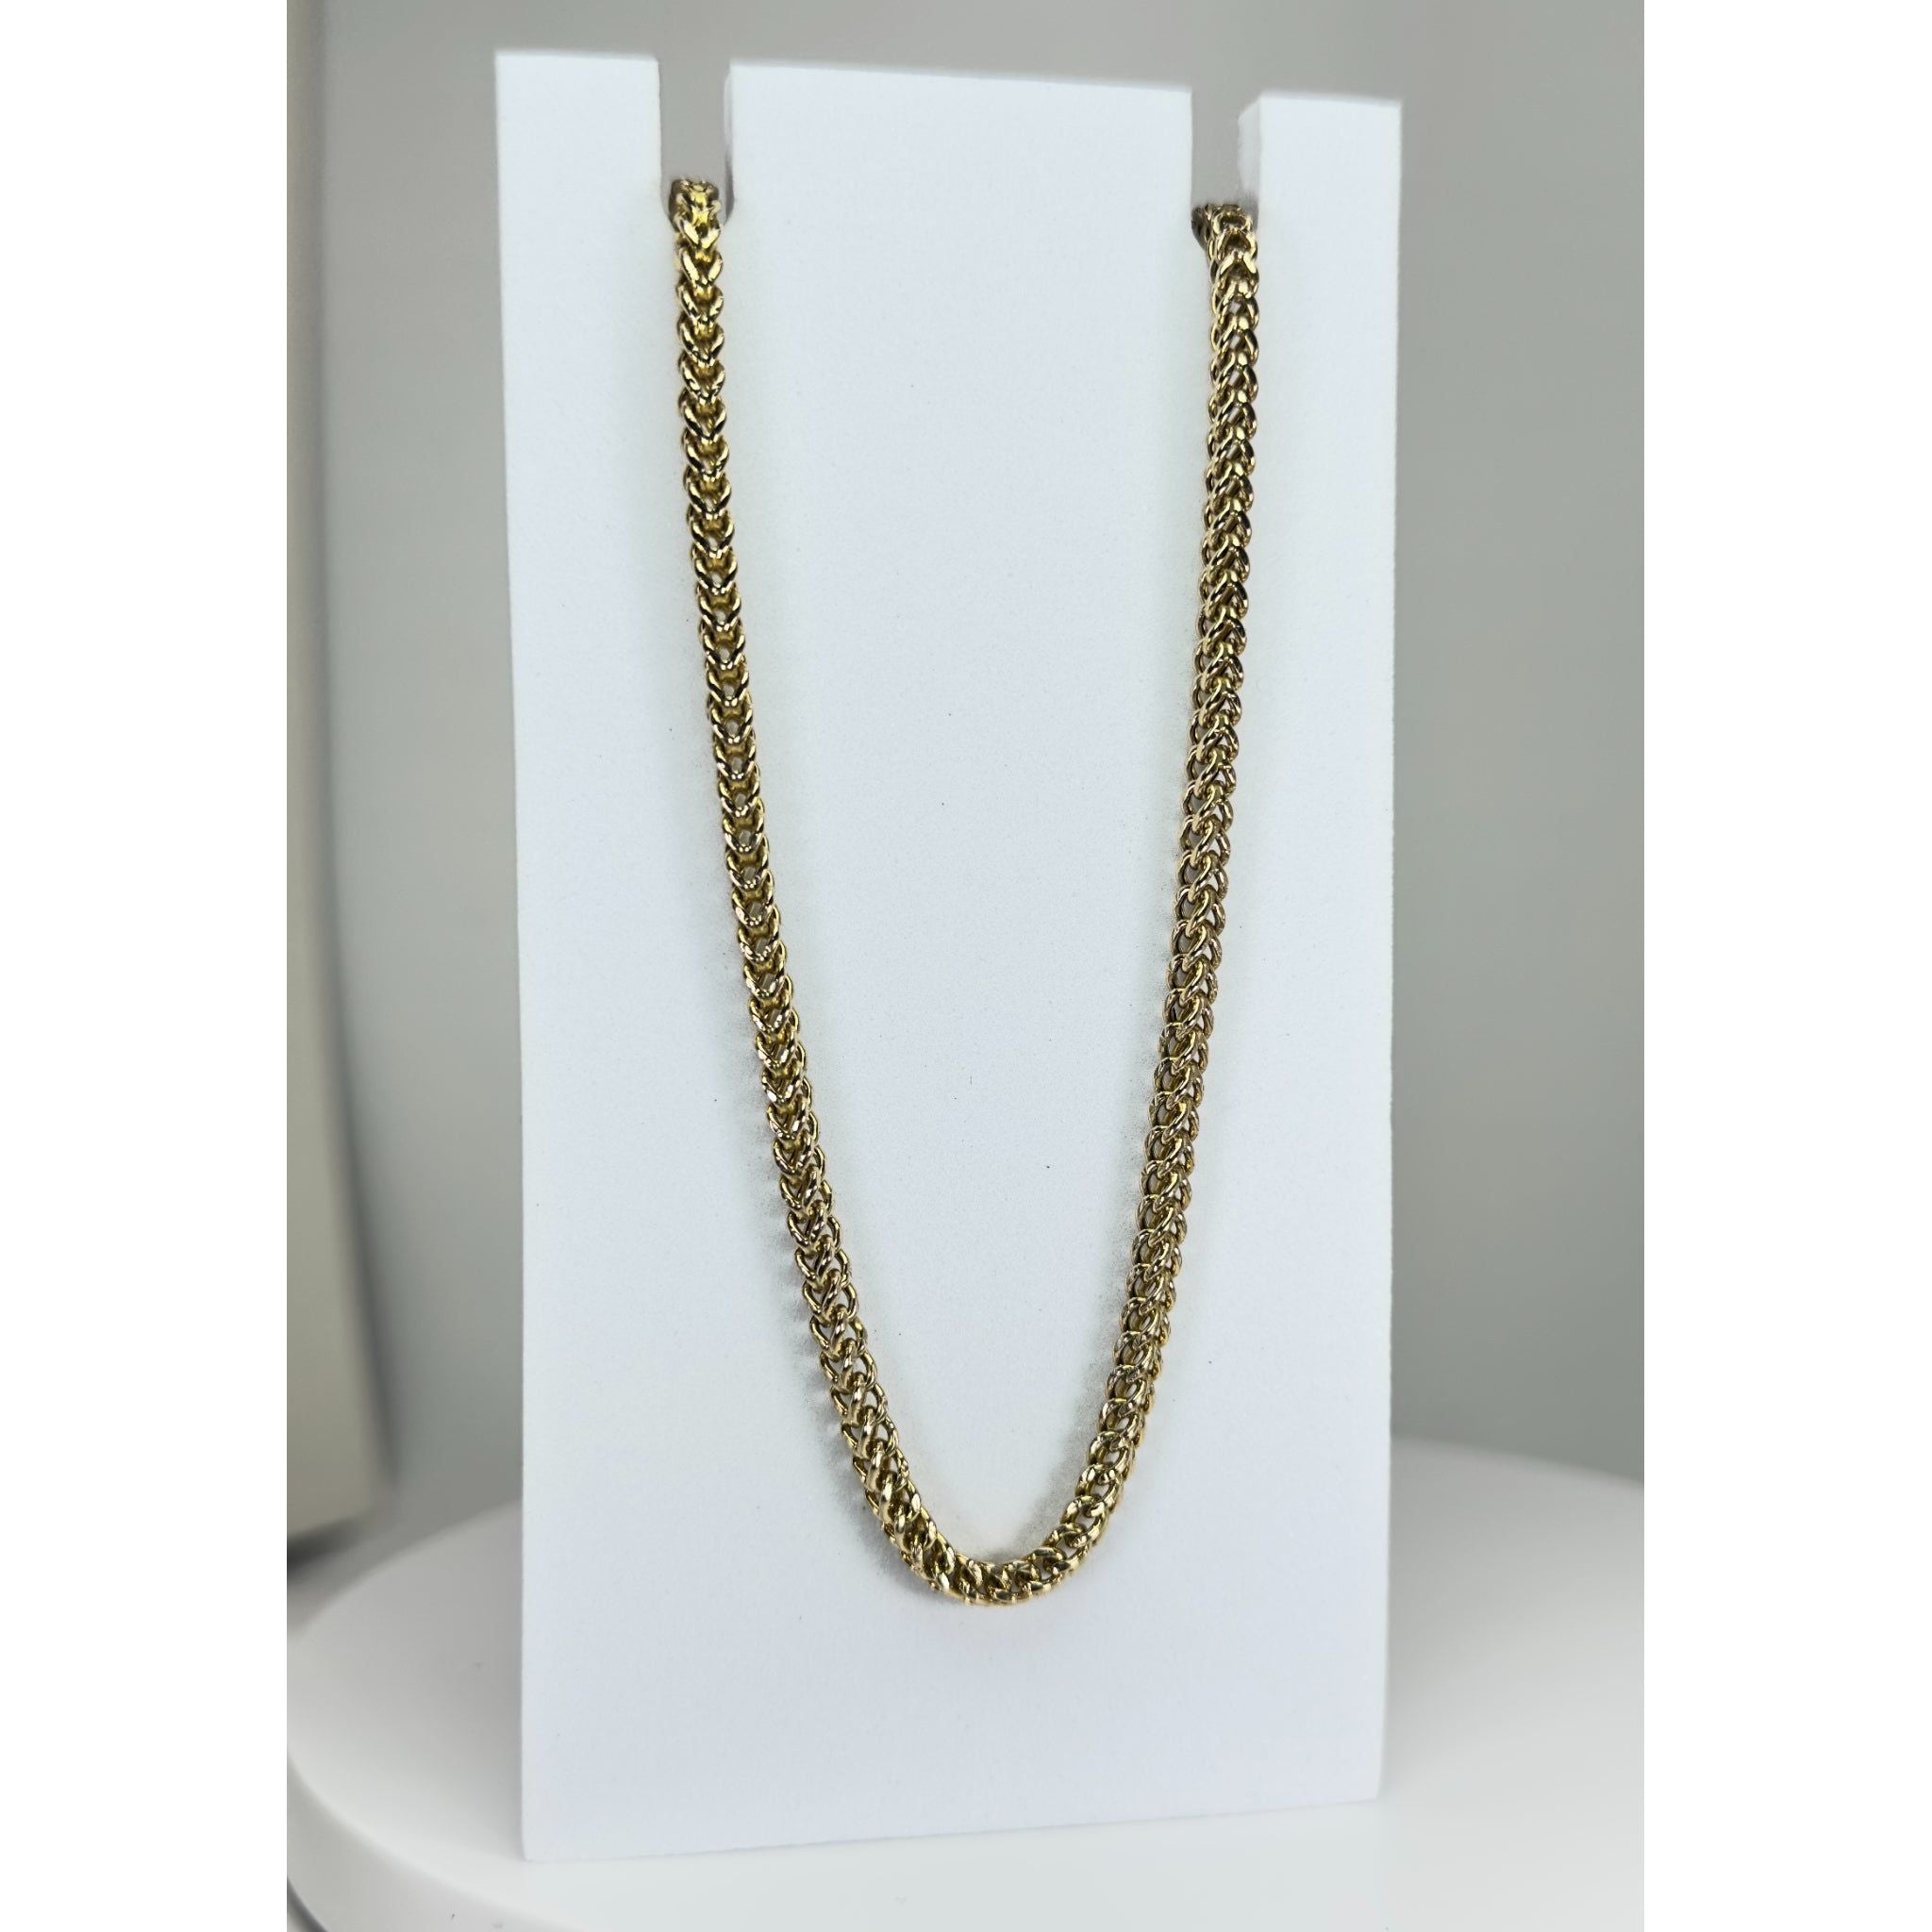 DR1741 - 10K Yellow Gold - Men's Gold Chains - Franco Link